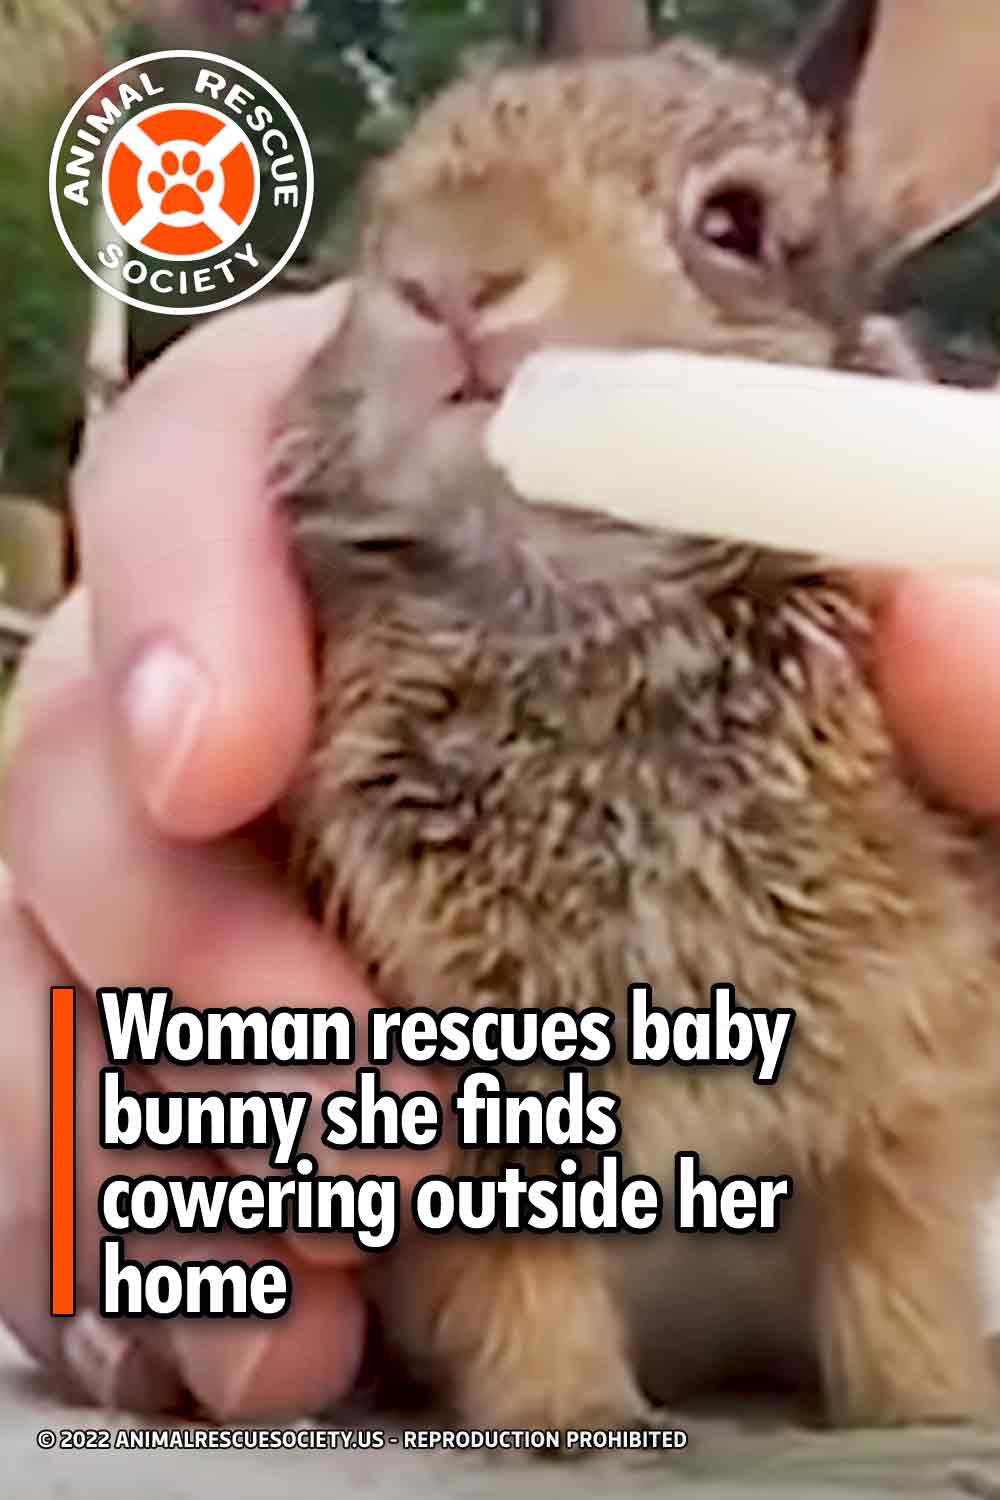 Woman rescues baby bunny she finds cowering outside her home.